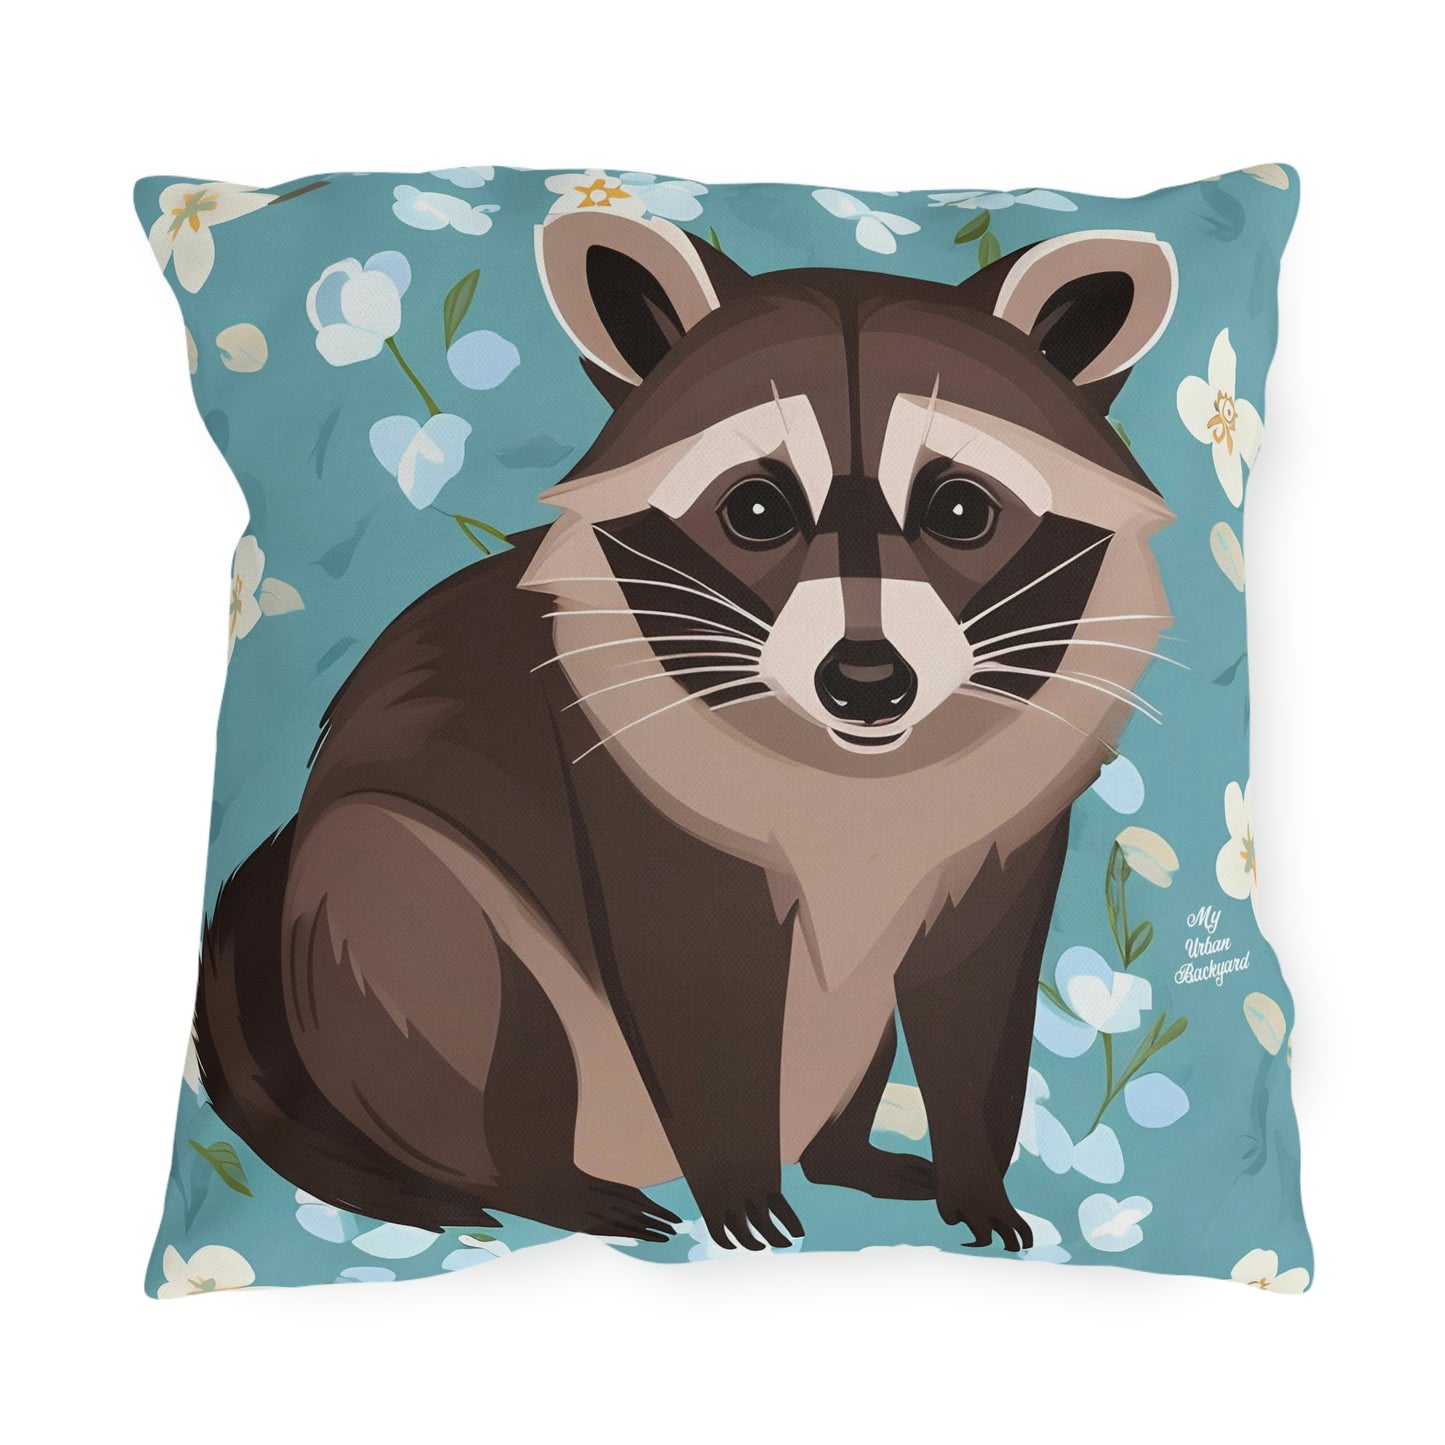 Young Raccoon and Flowers, Versatile Throw Pillow - Home or Office Decor